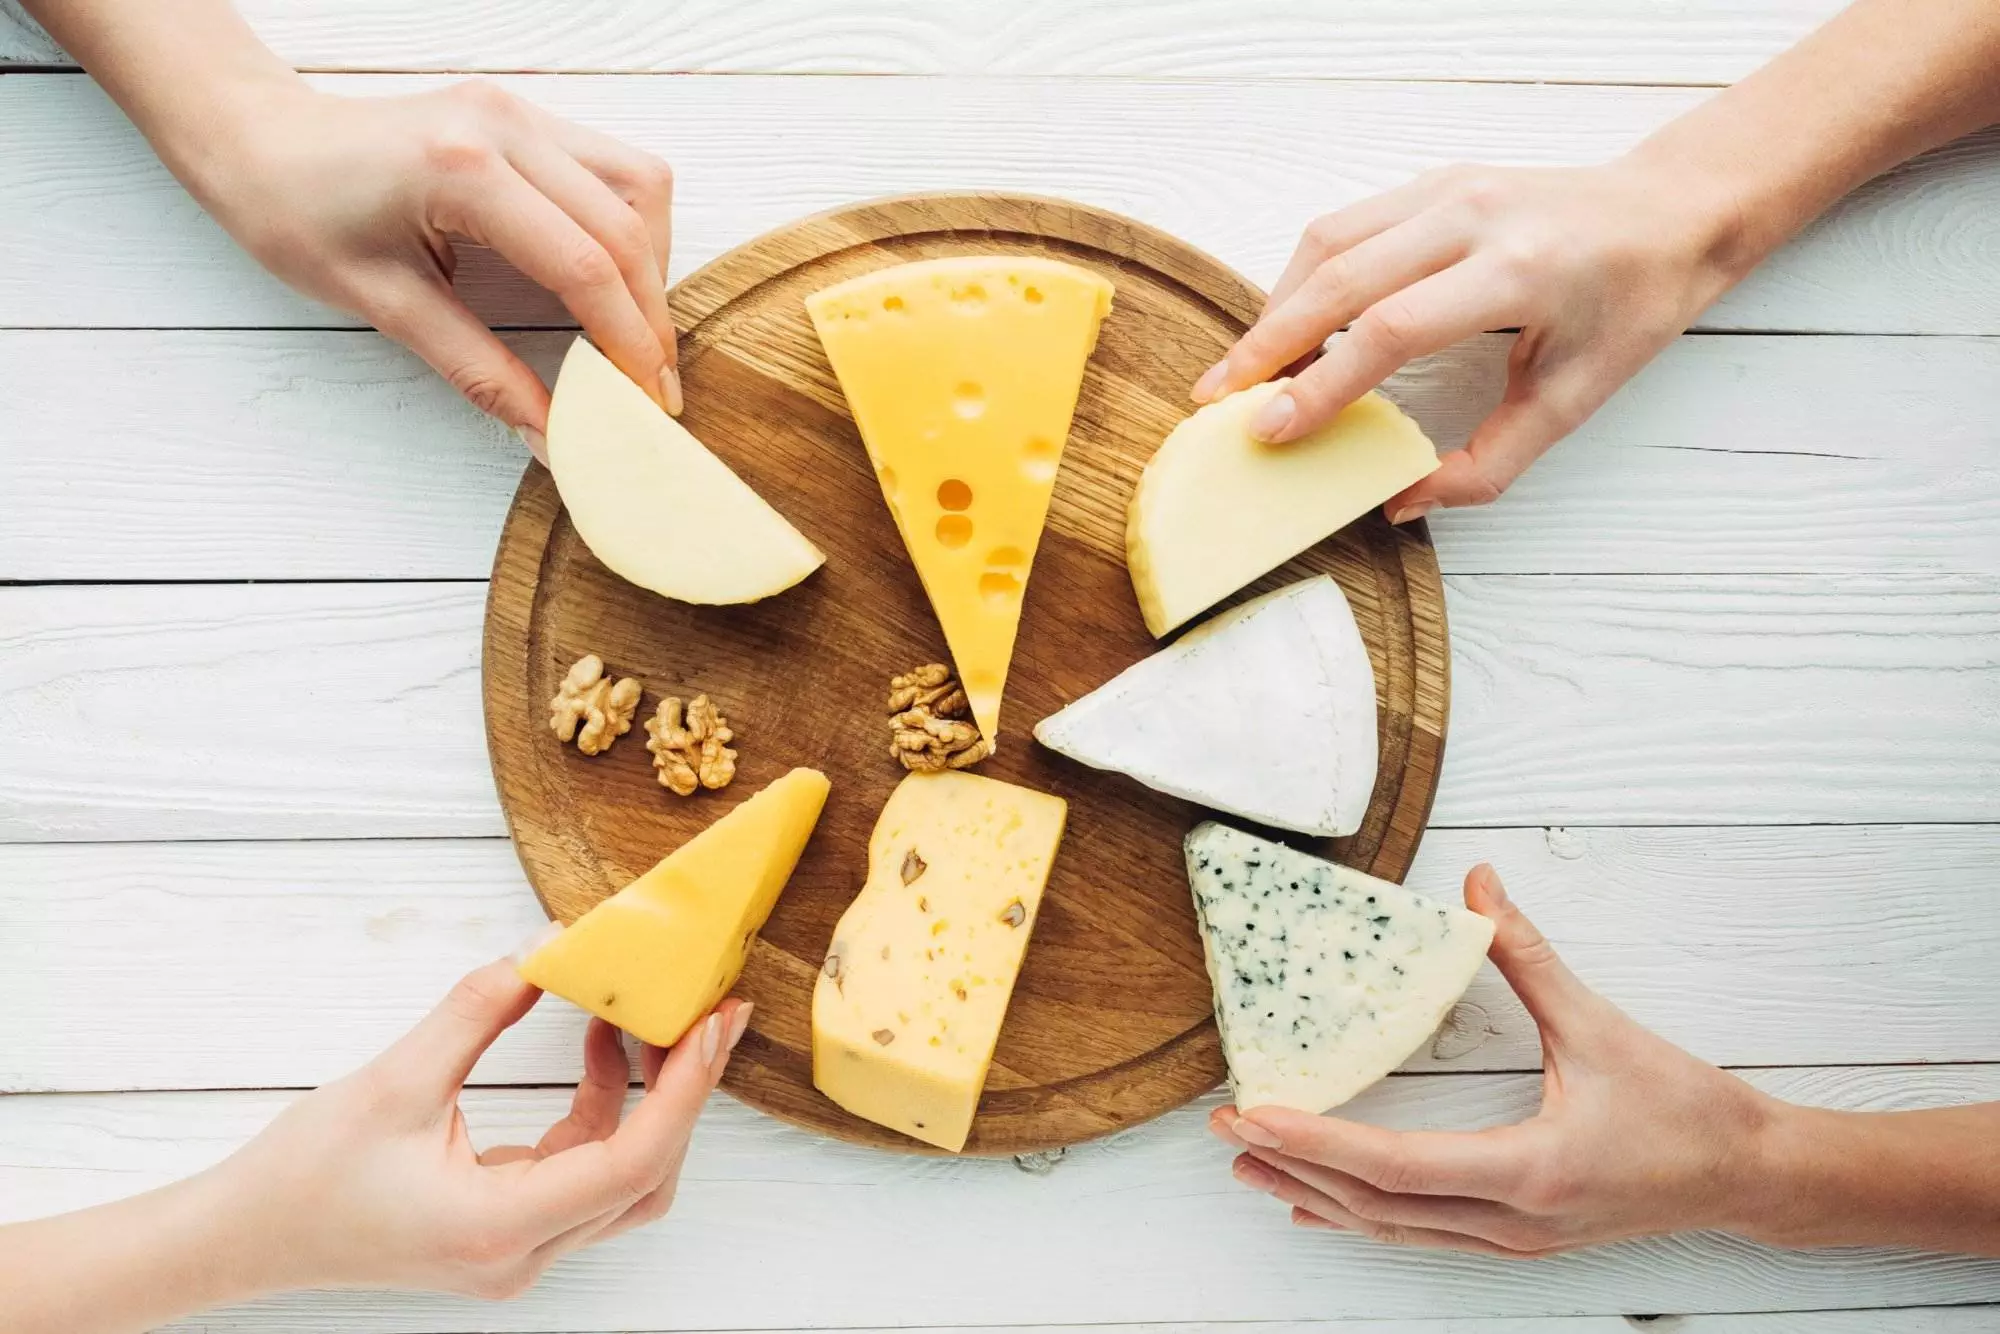 Hands selecting various cheeses on wooden board.